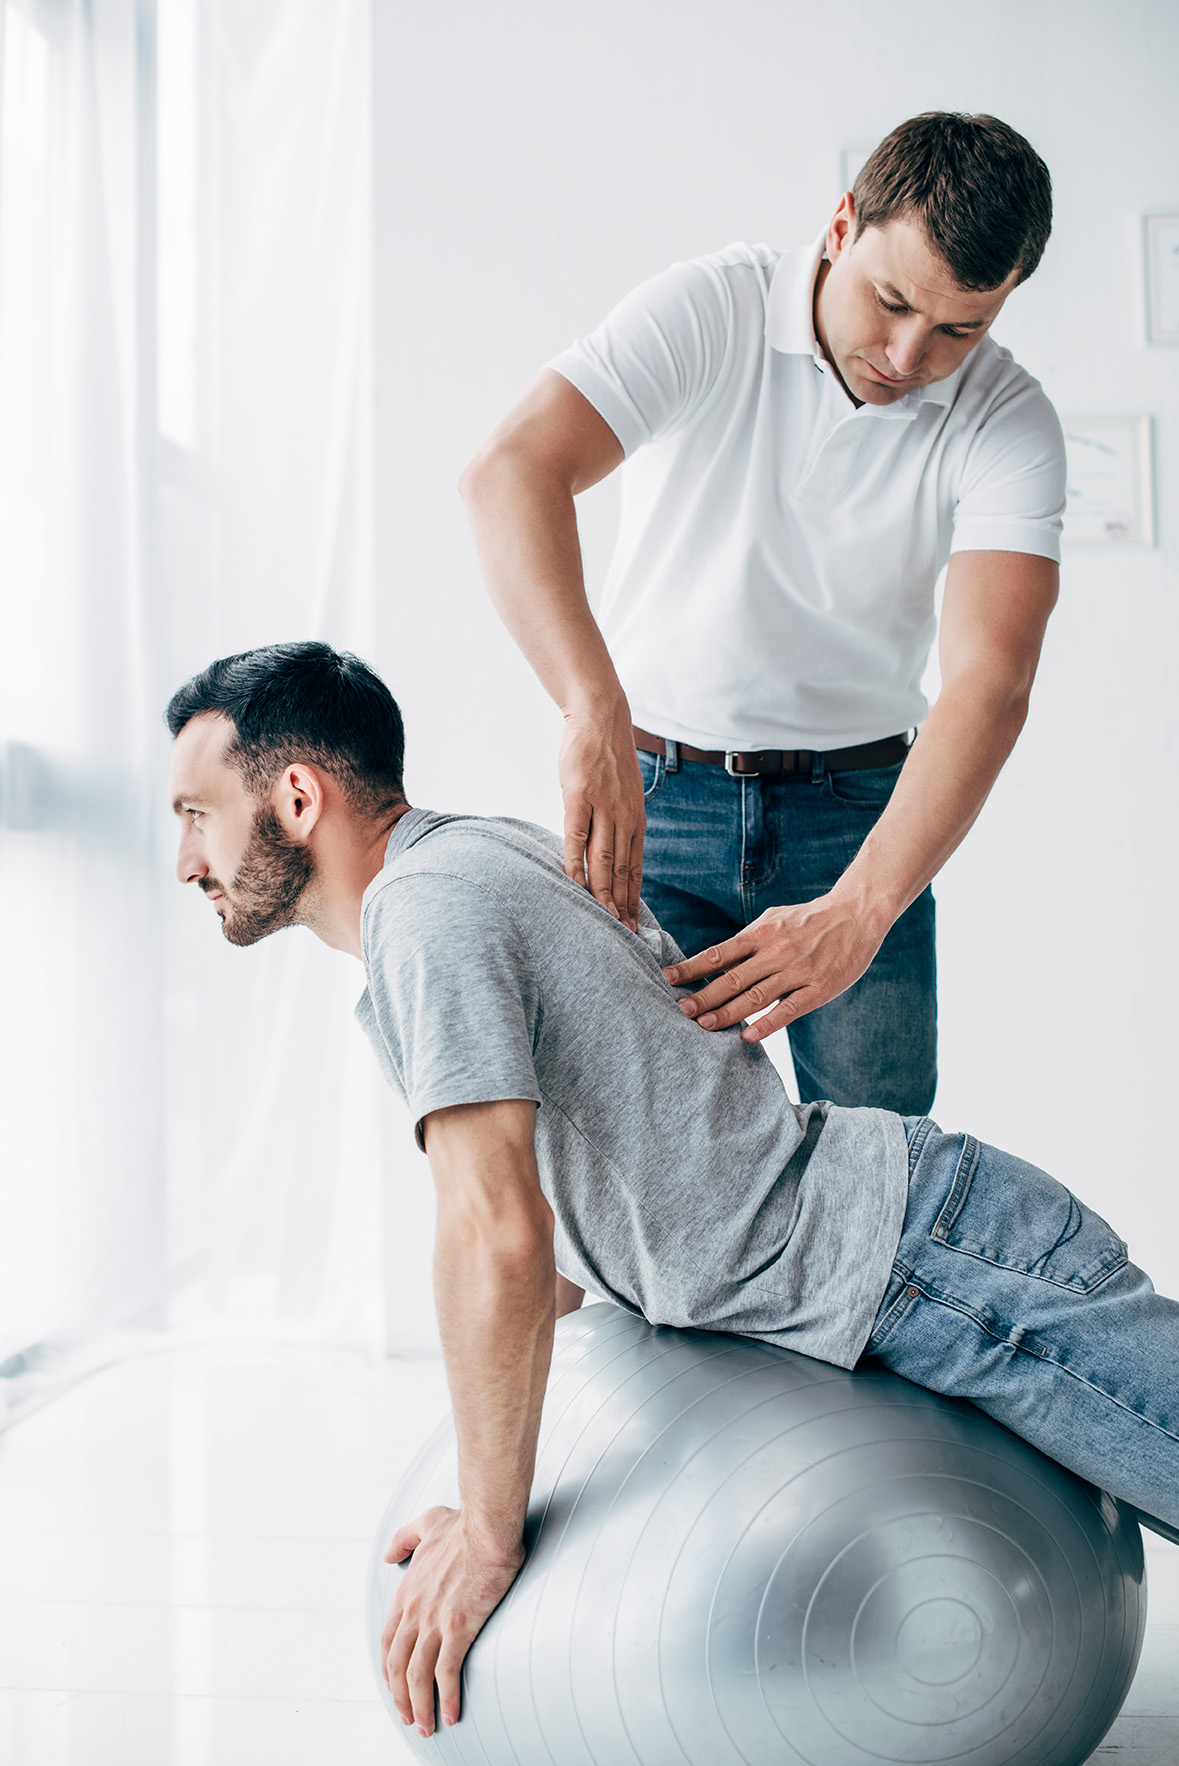 chiropractor adjusting a patient before recording the visit in an ehr system. Learn the differences between ehr and emr